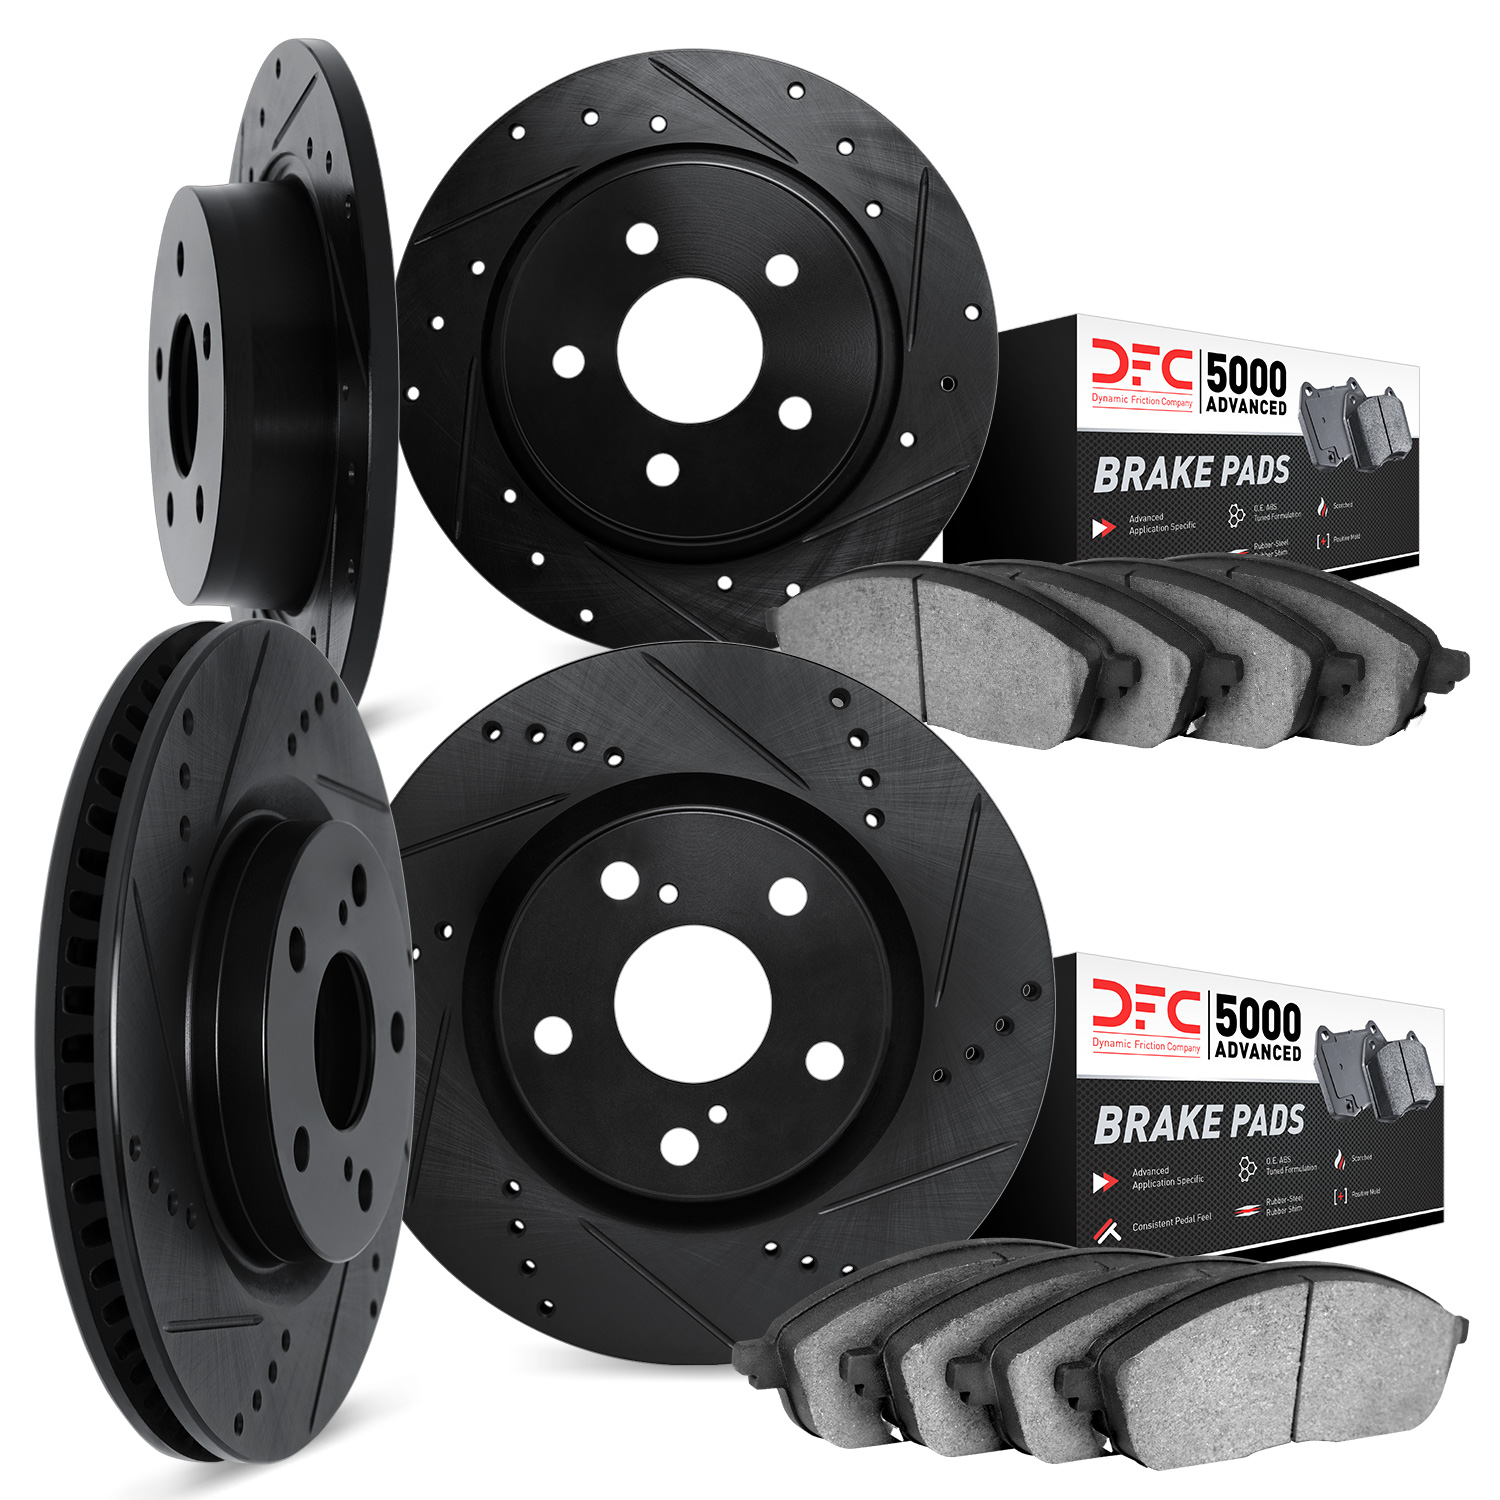 8504-76136 Drilled/Slotted Brake Rotors w/5000 Advanced Brake Pads Kit [Black], 2002-2006 Lexus/Toyota/Scion, Position: Front an